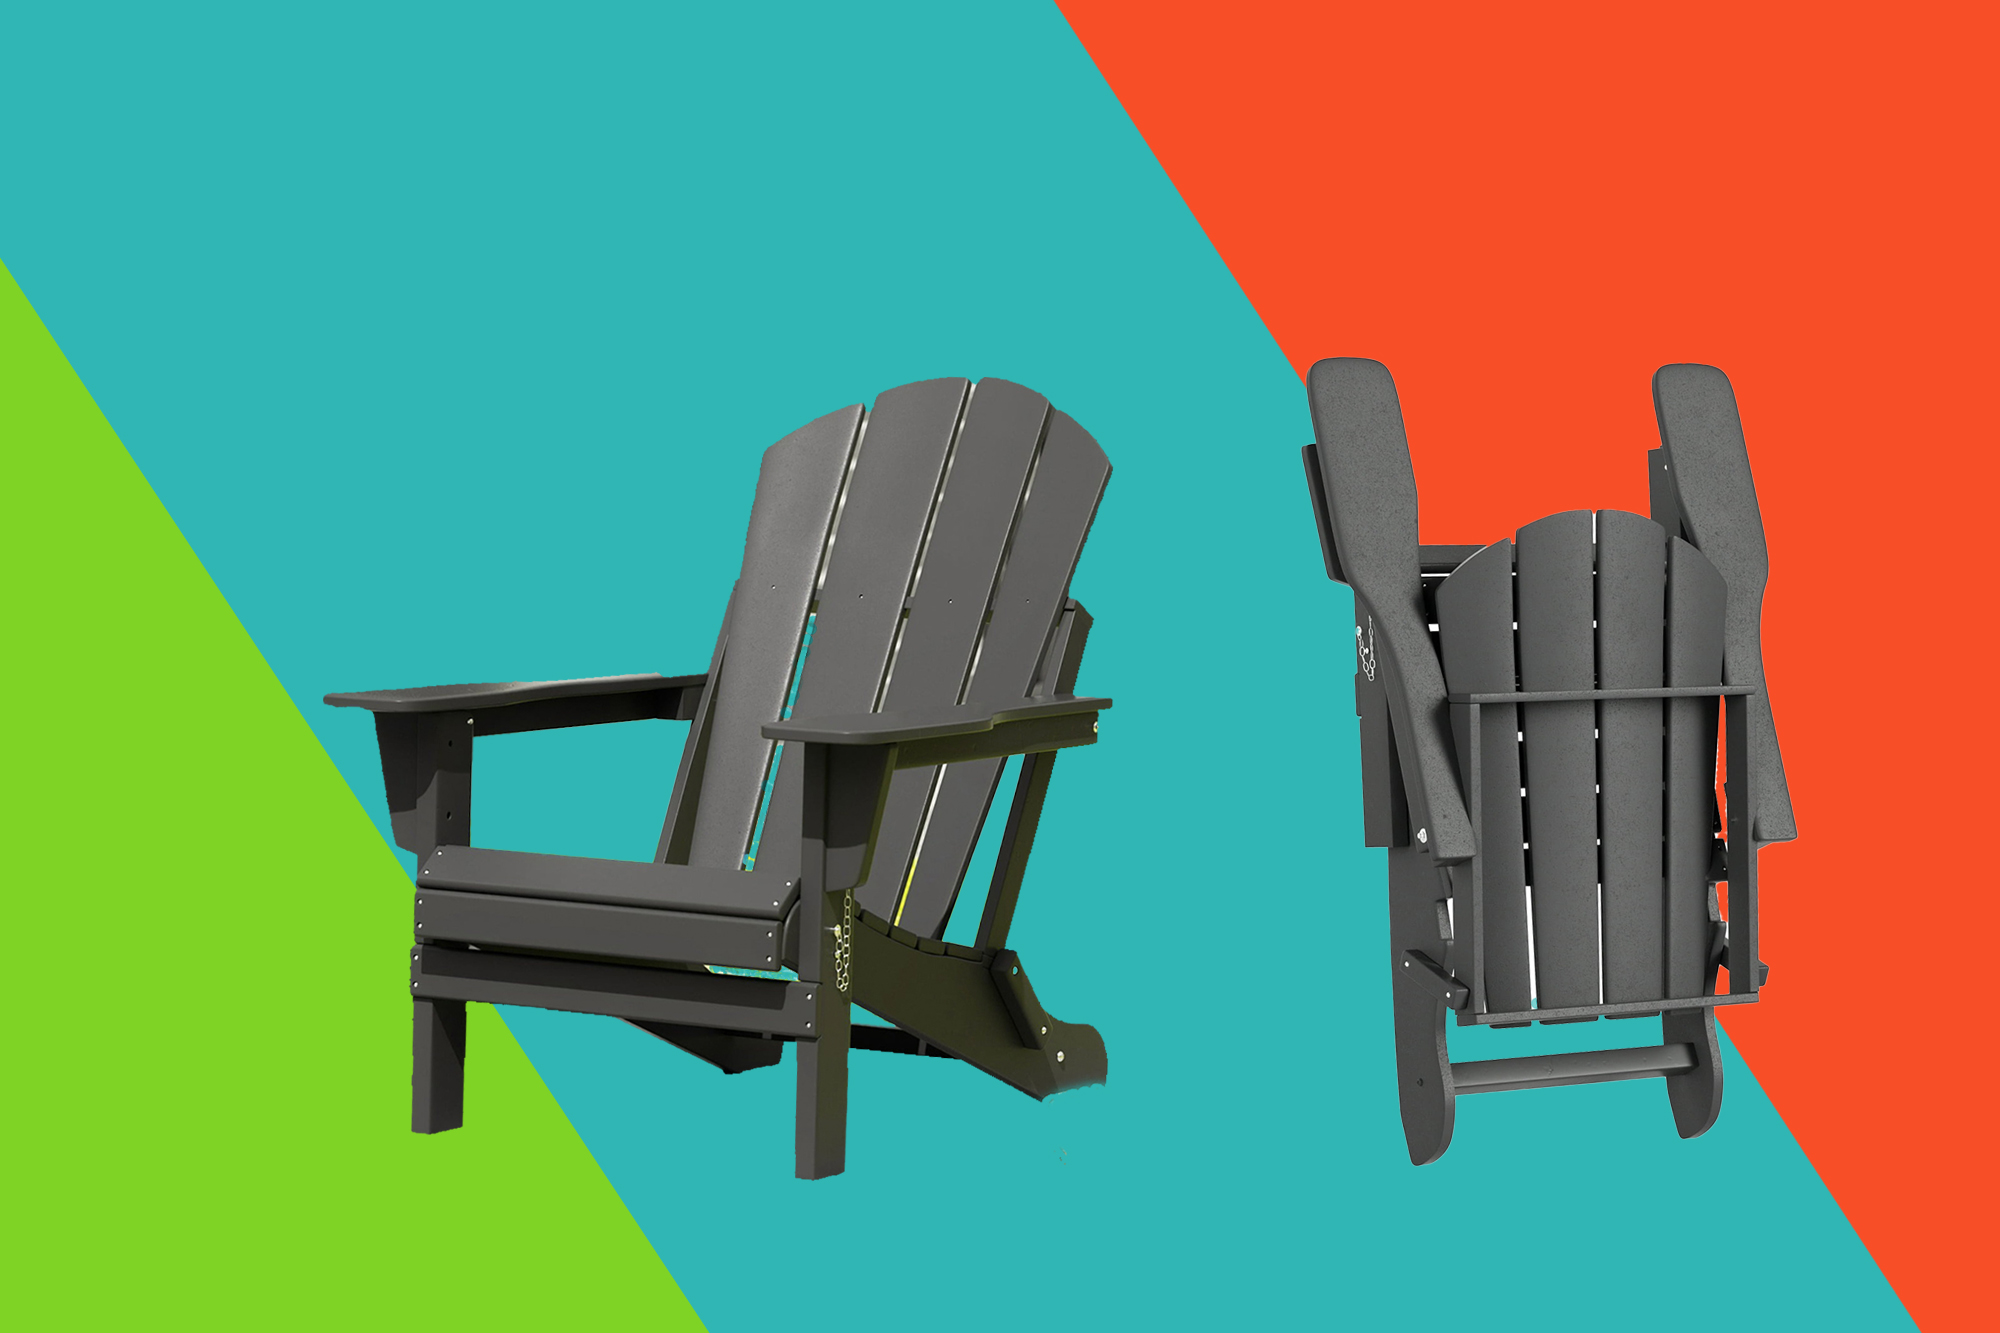 Last chance to grab this foldable Adirondack chair over 50% off — hurry, the sale ends soon! 